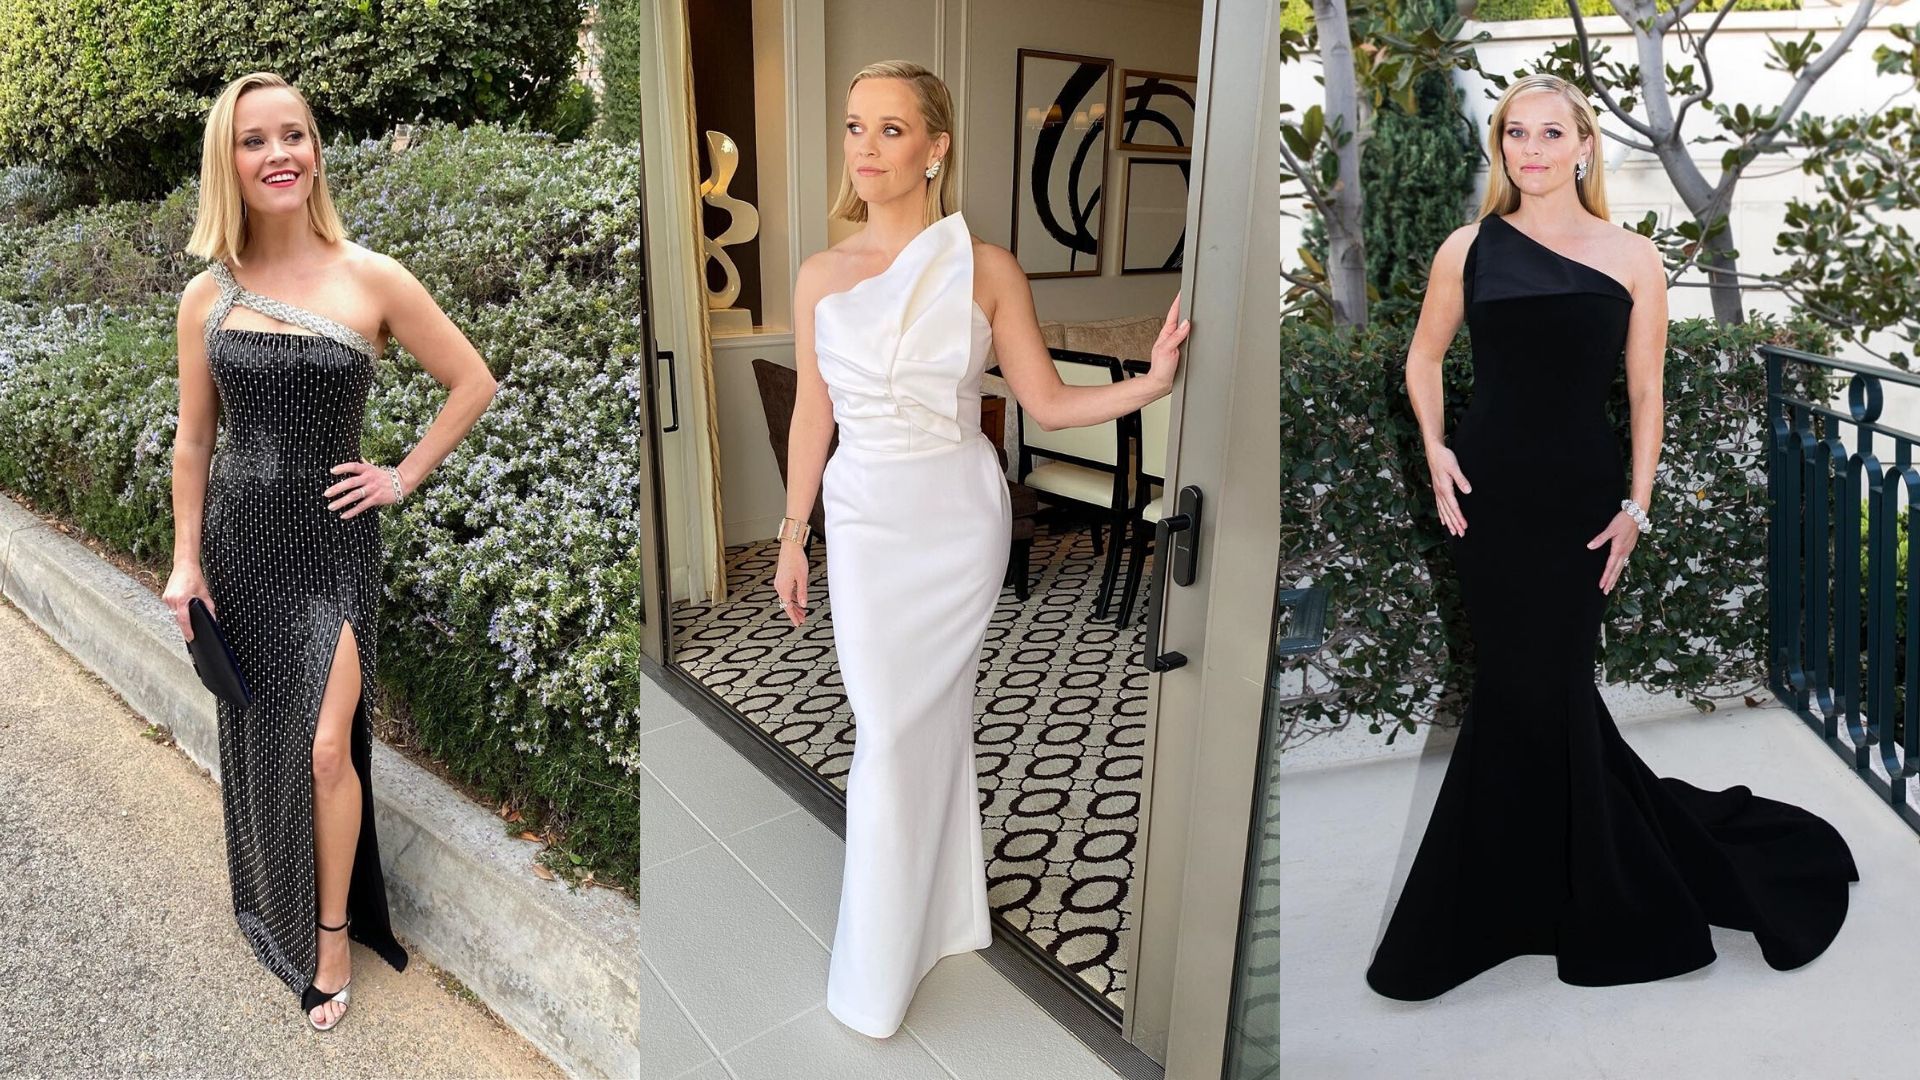 Reese Witherspoon's Best Red Carpet Looks - Reese Witherspoon Style